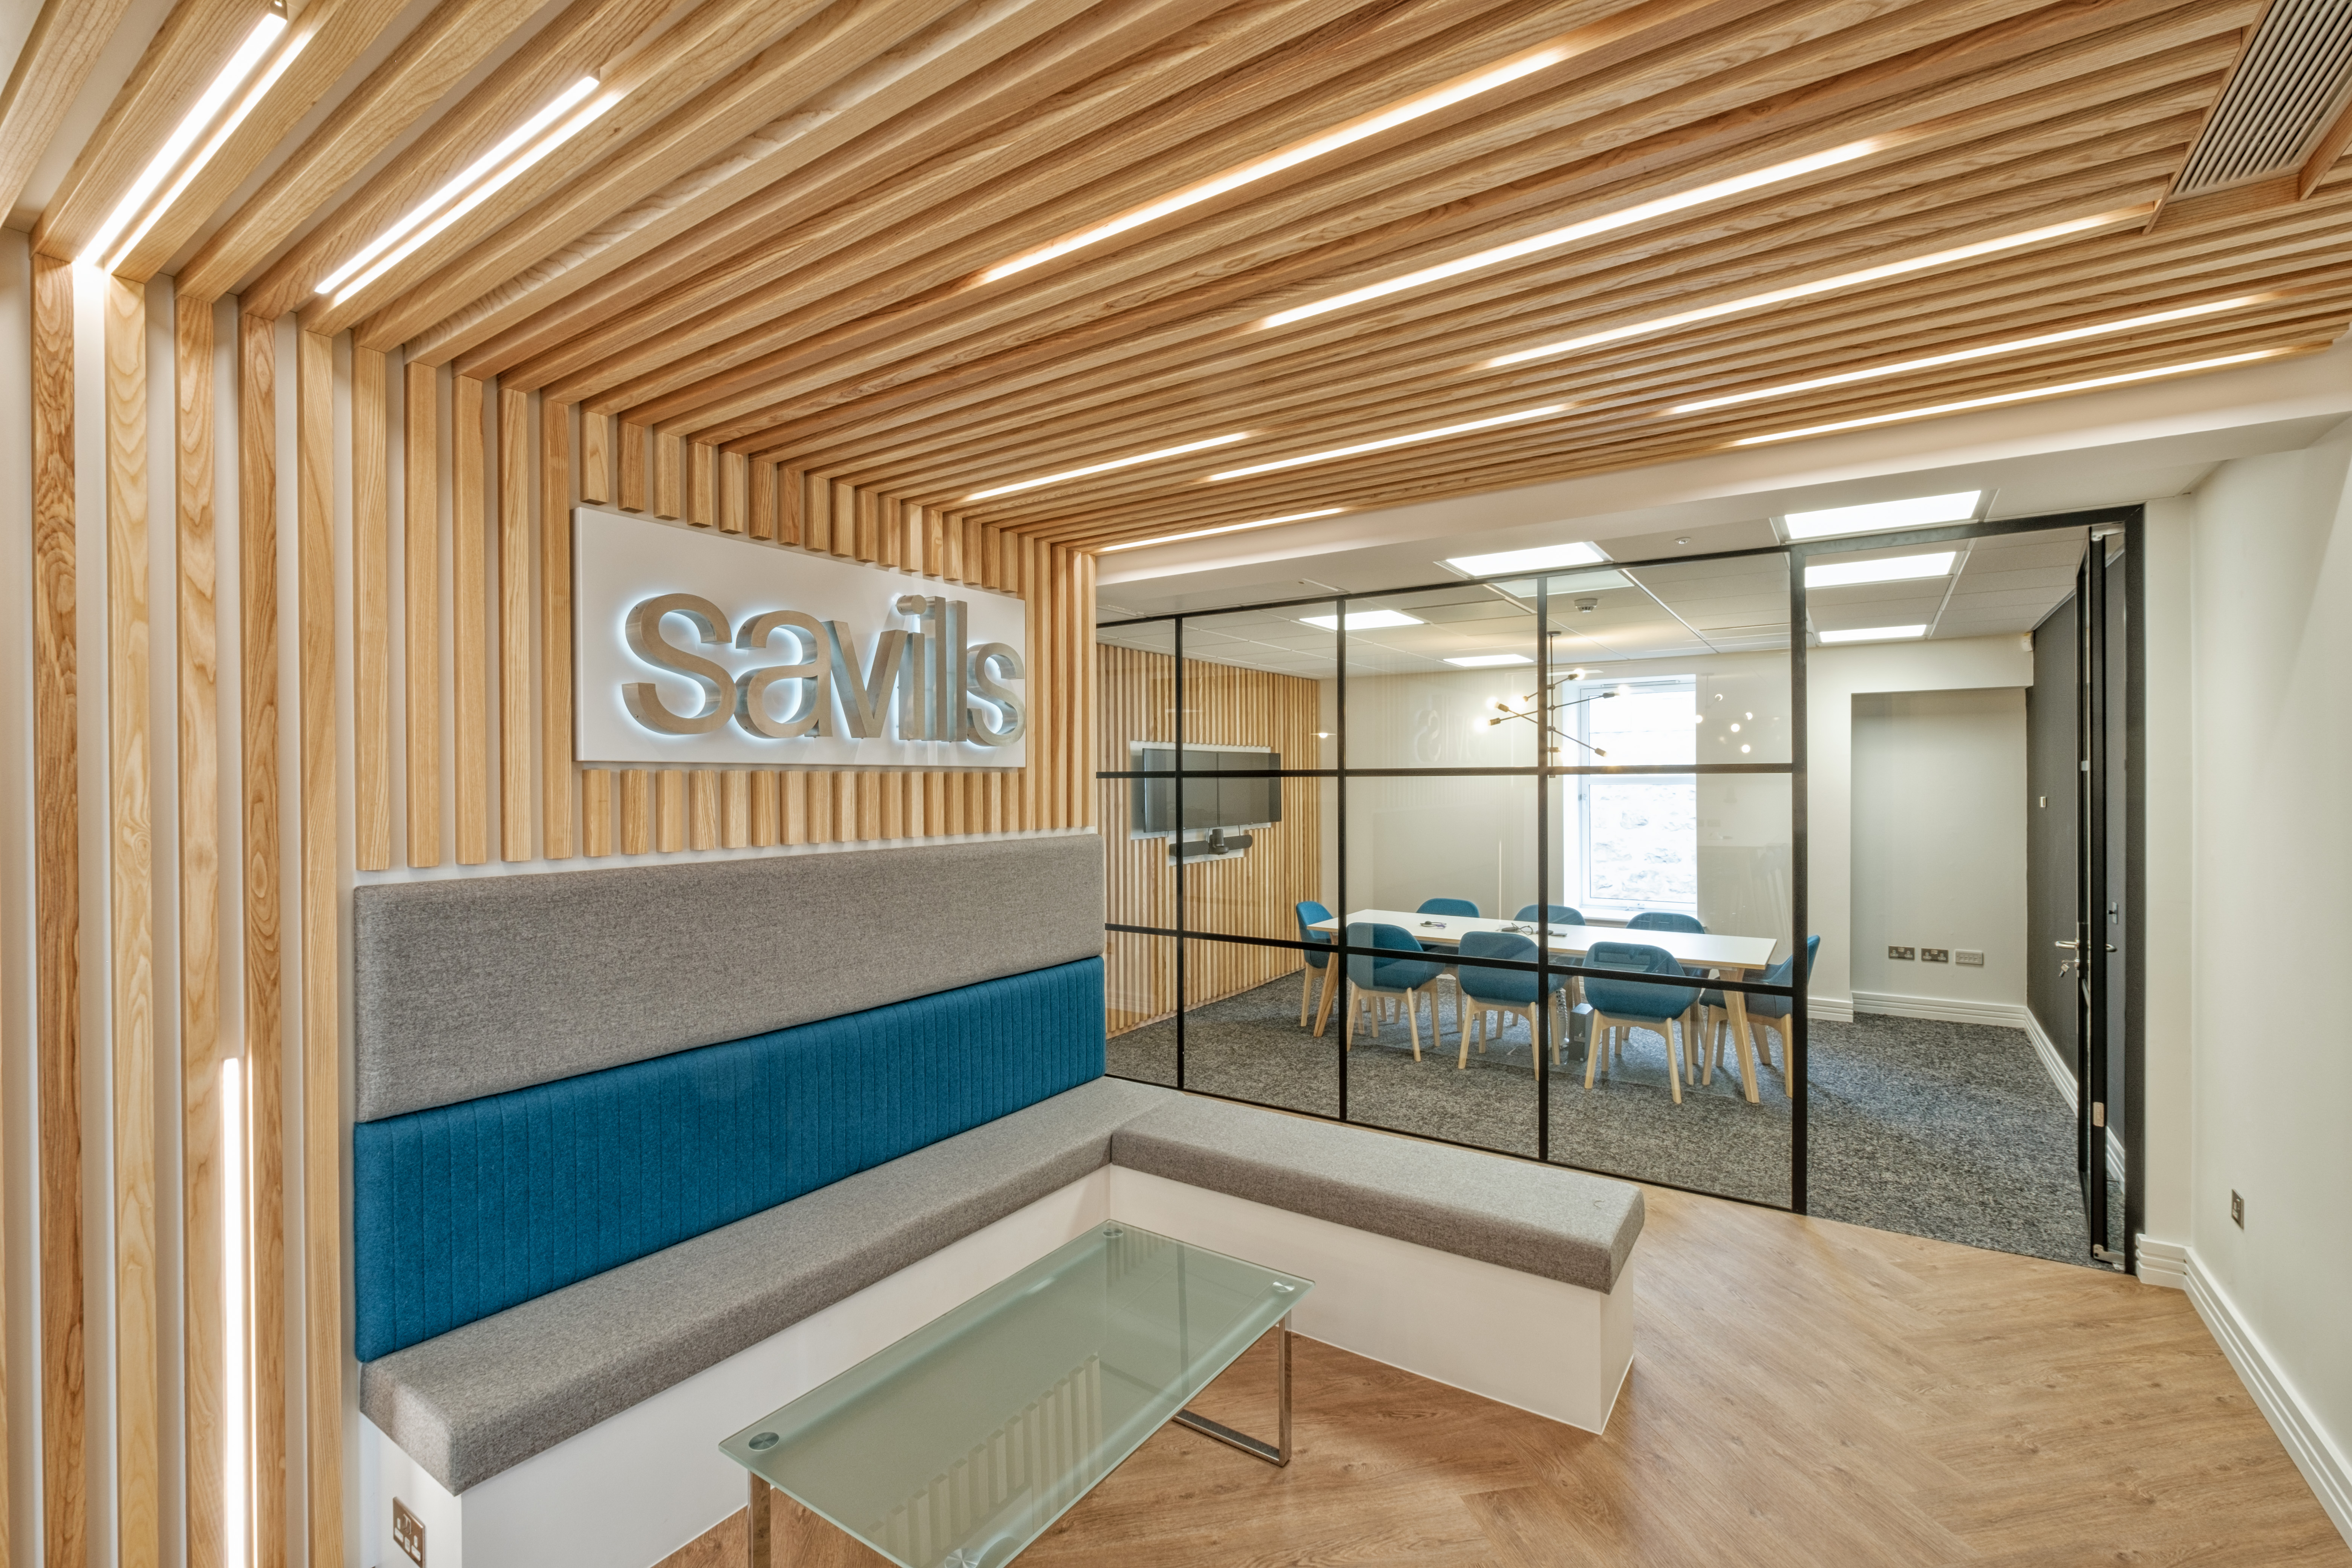 Savills completes move to new offices in Aberdeen